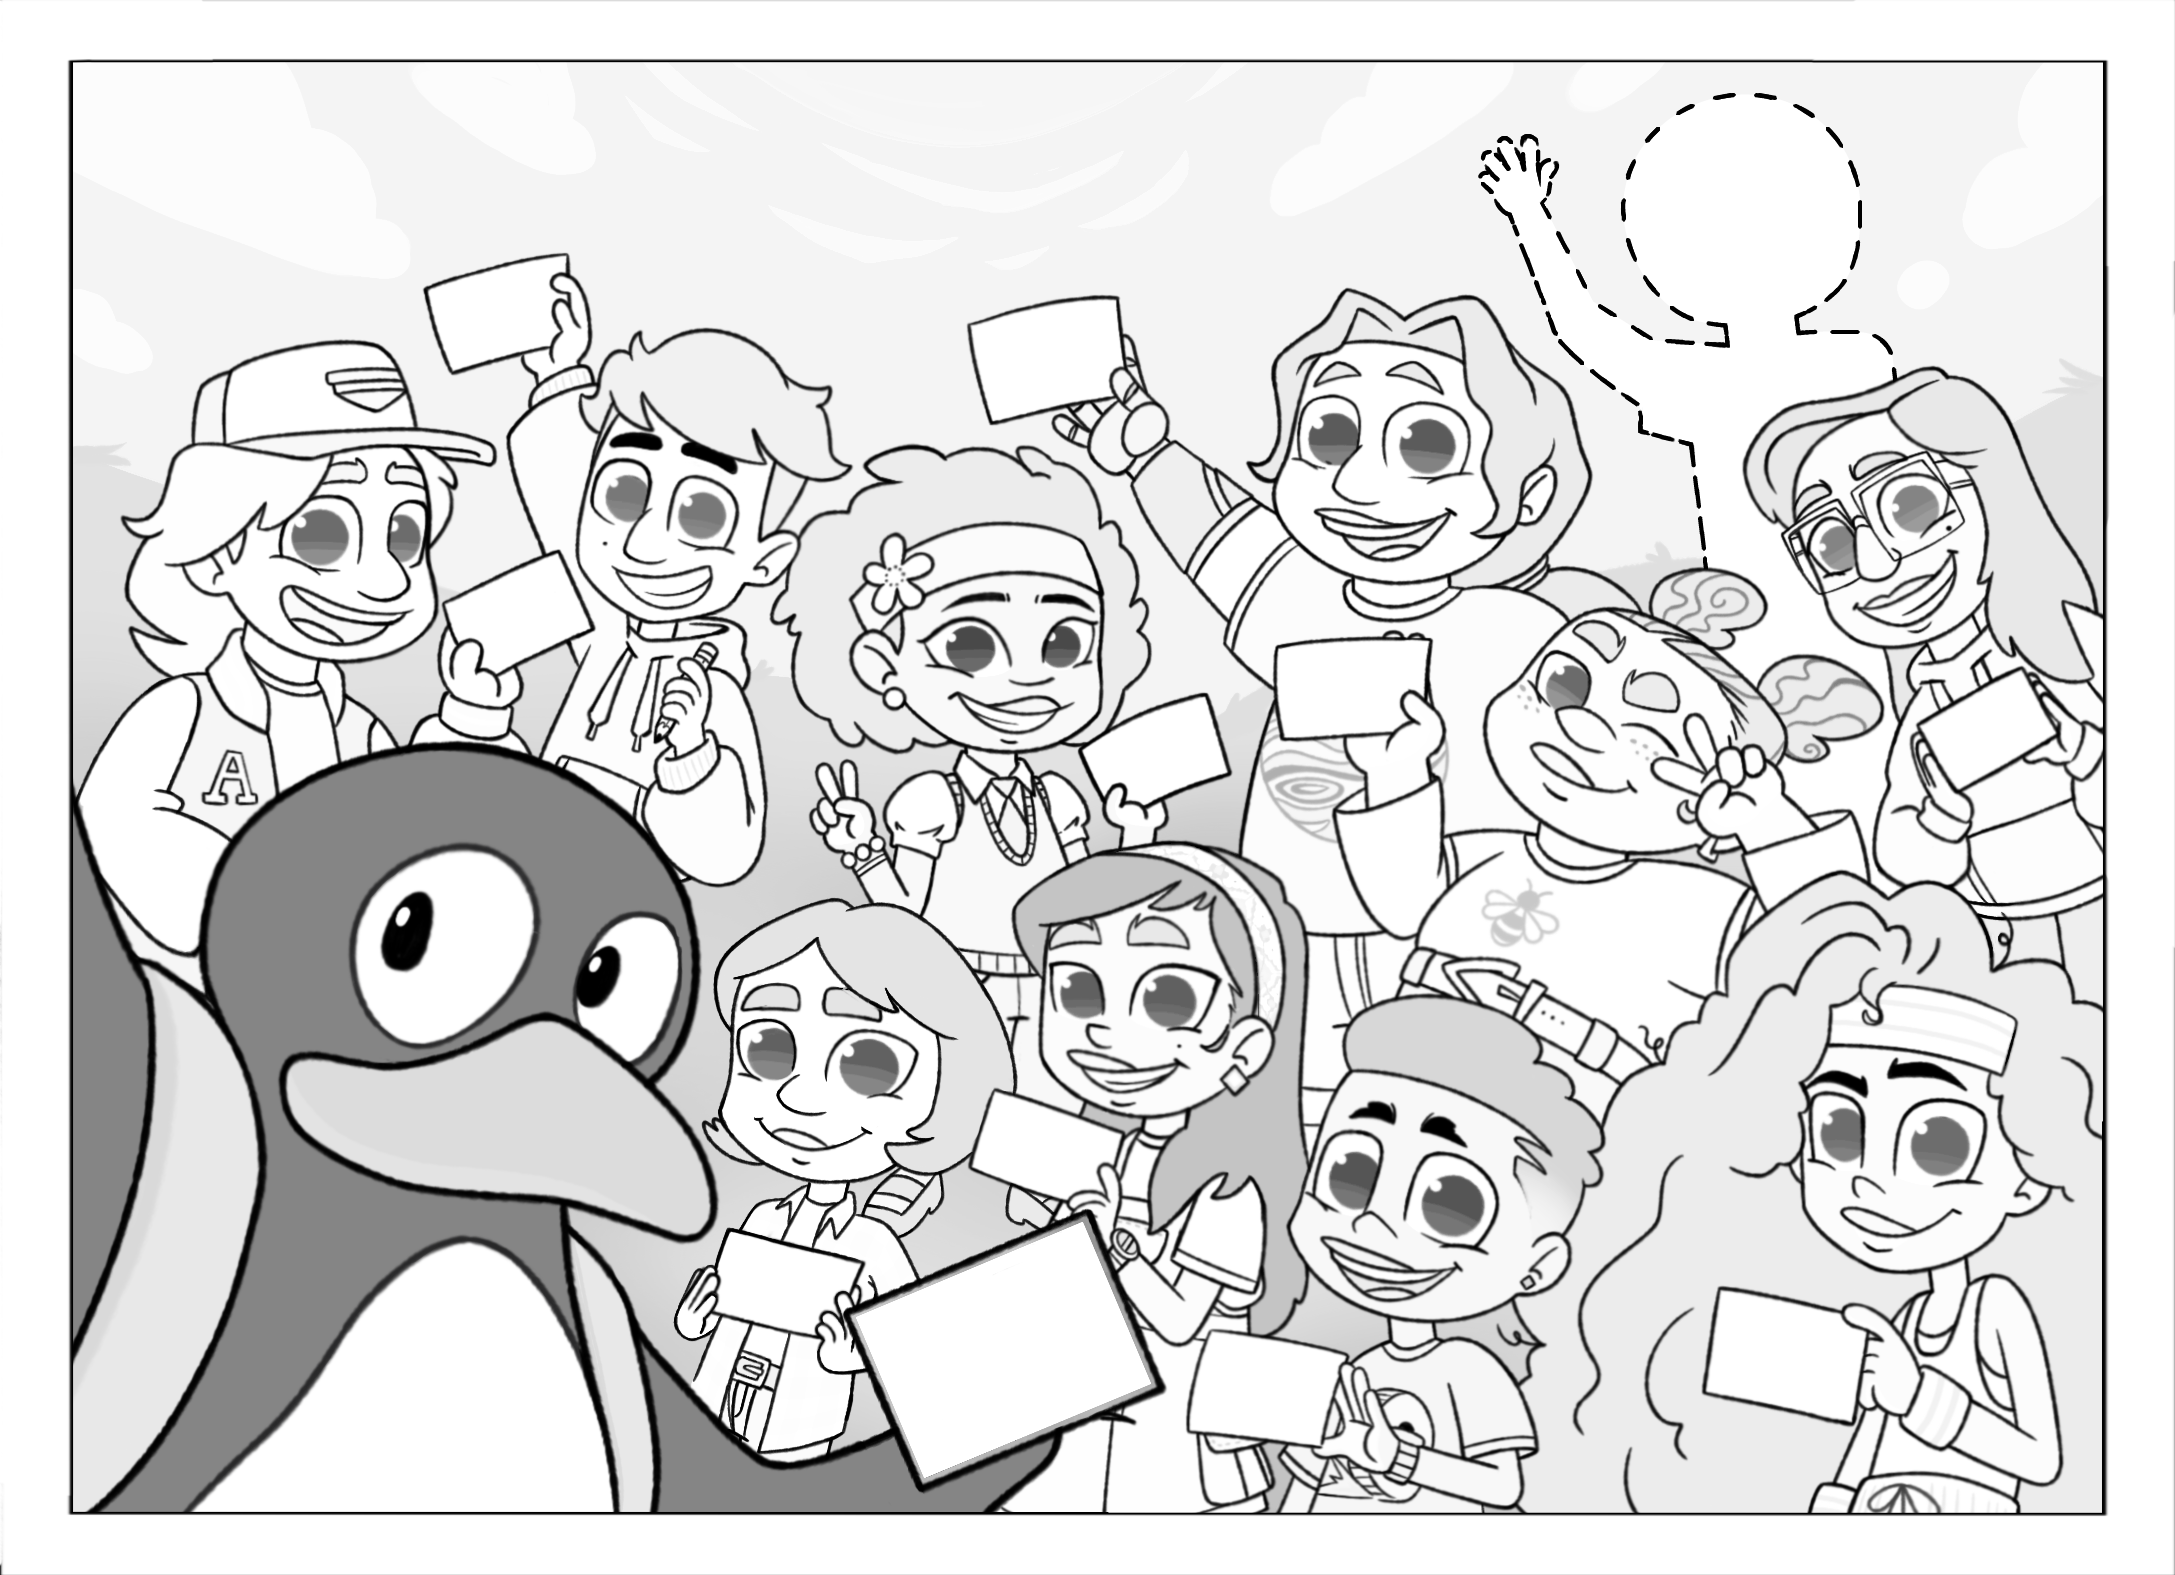 A colorless line-art image of JiJi taking a selfie with 10 childredn, each holding a postcard